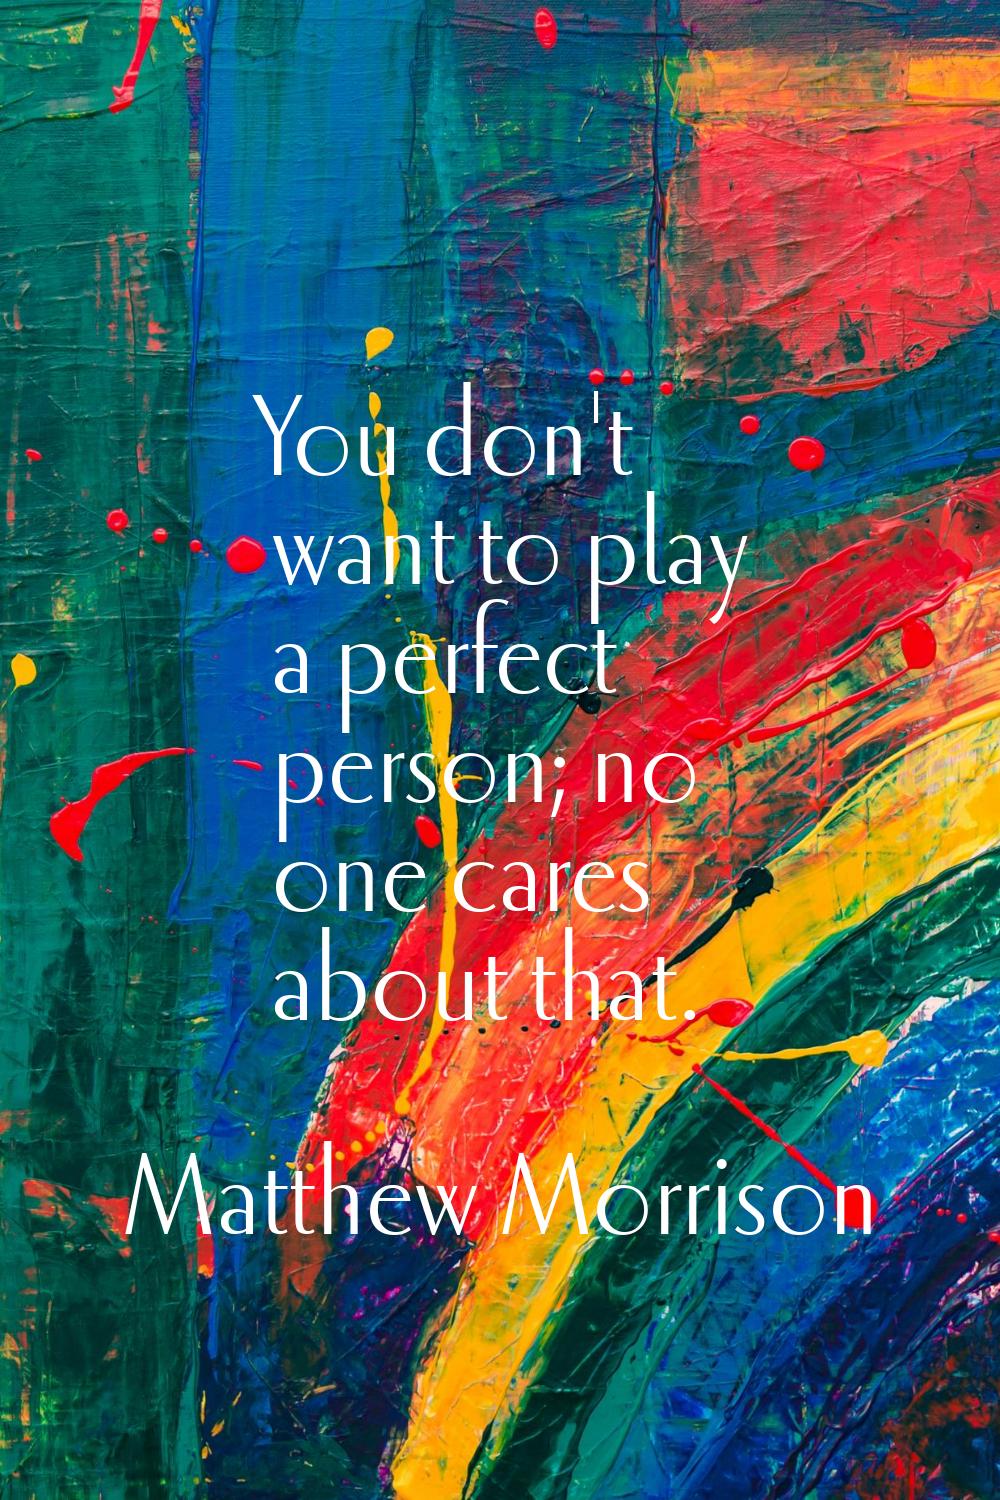 You don't want to play a perfect person; no one cares about that.